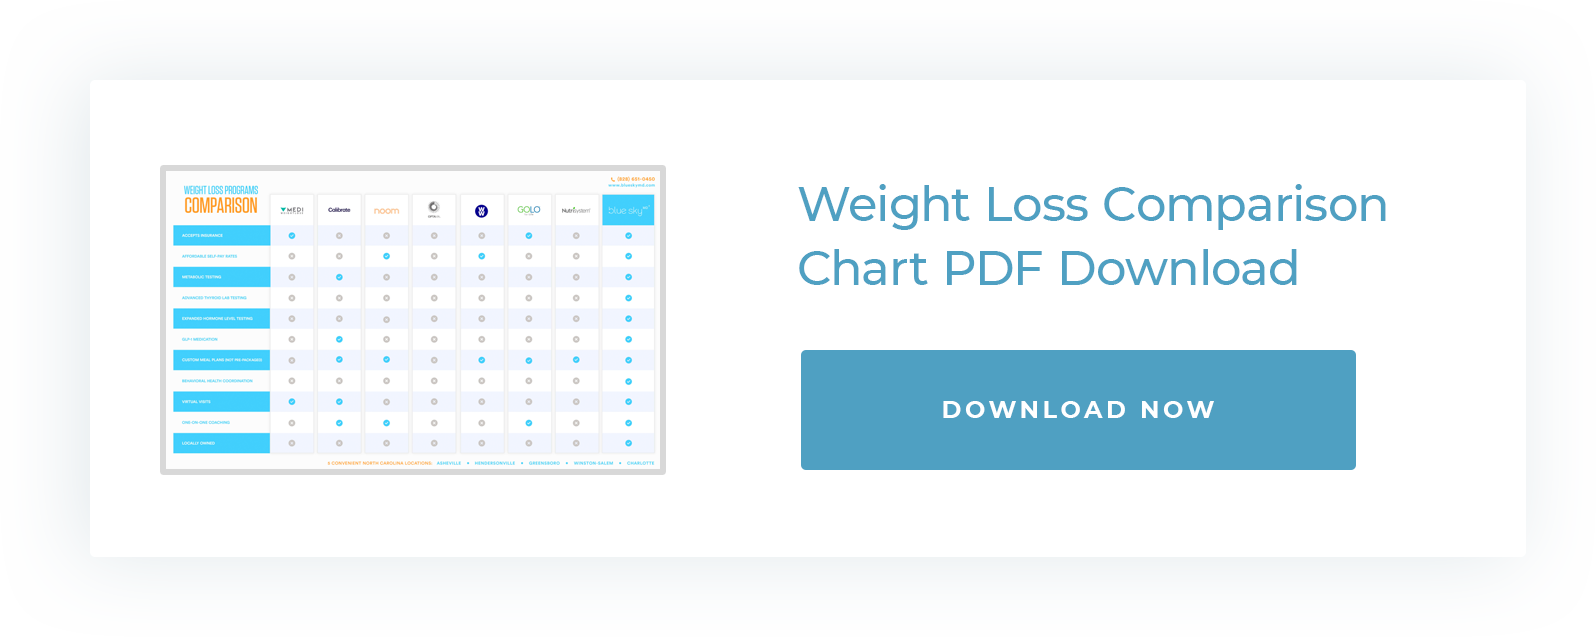 Weight Loss Comparison Chart PDF Download